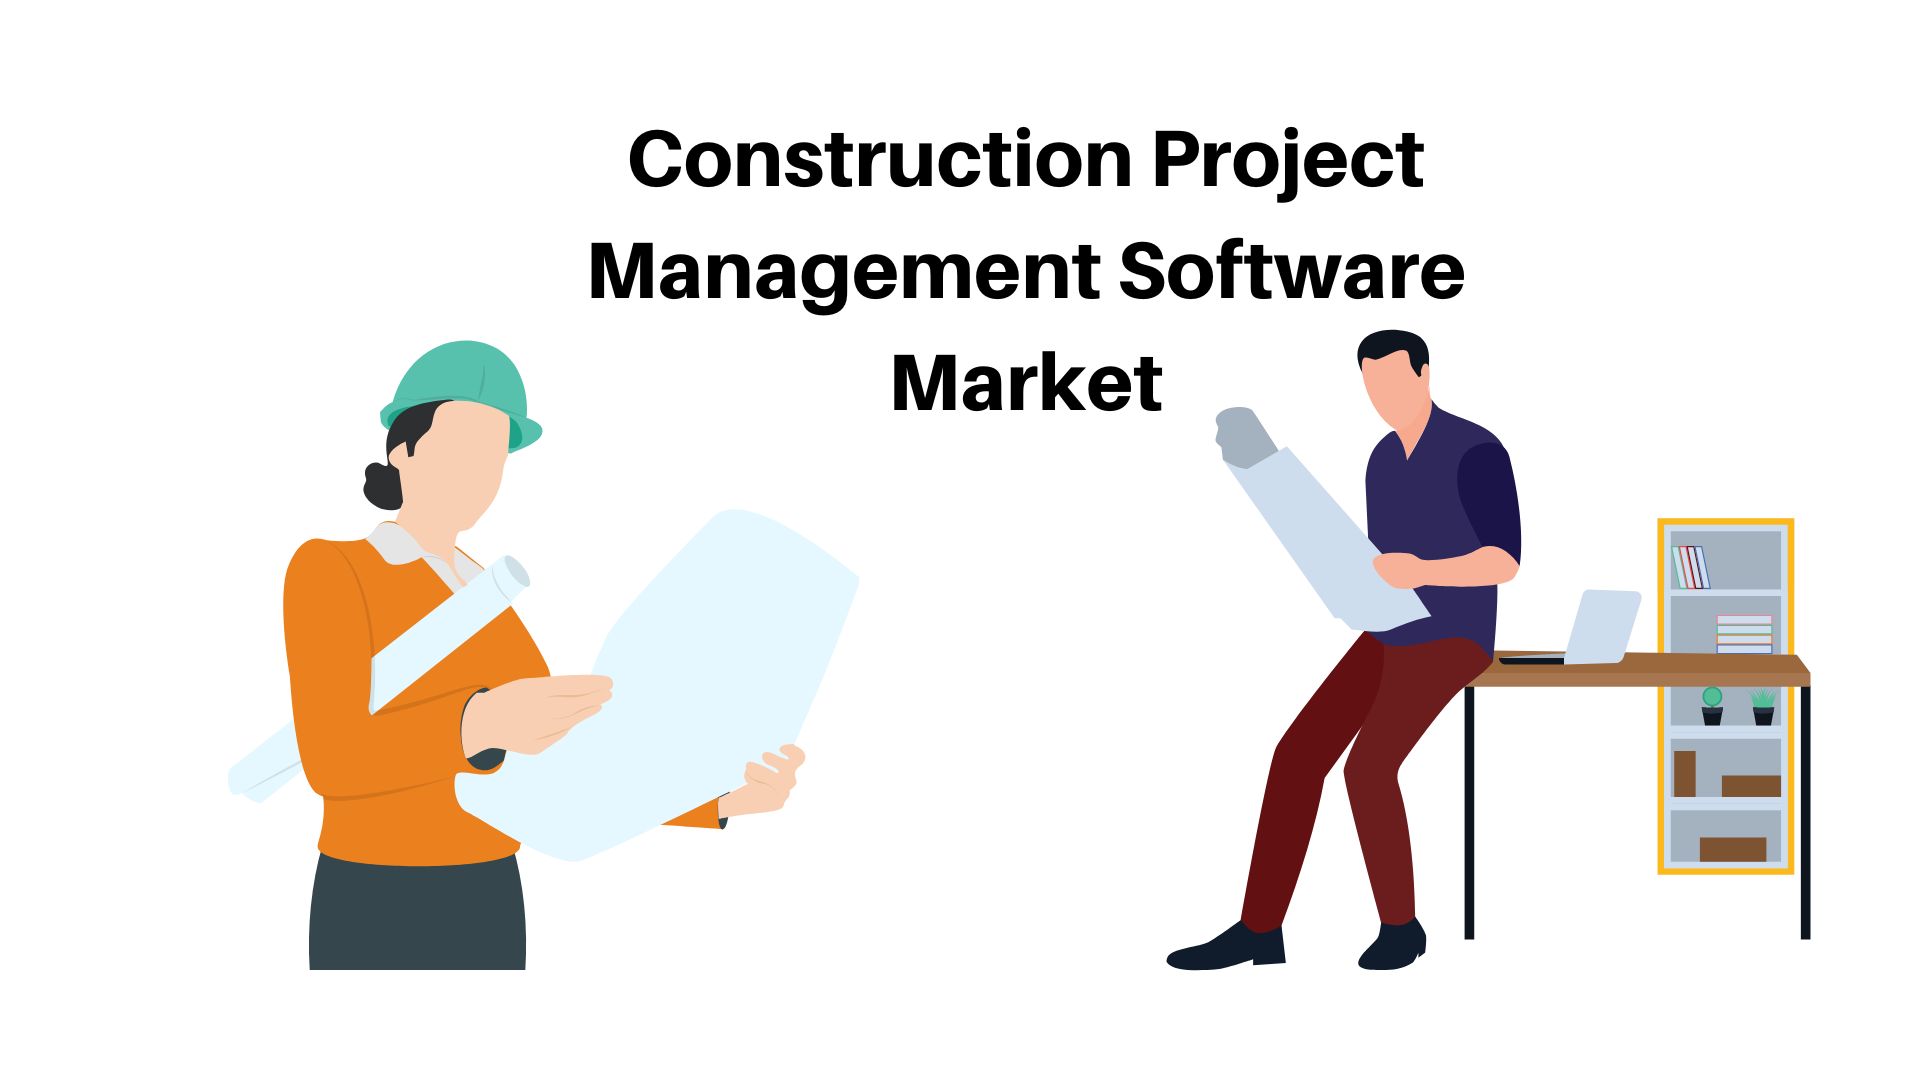 Construction Project Management Software Market Size (USD 2.86 Million in 2032) with 6.1% CAGR